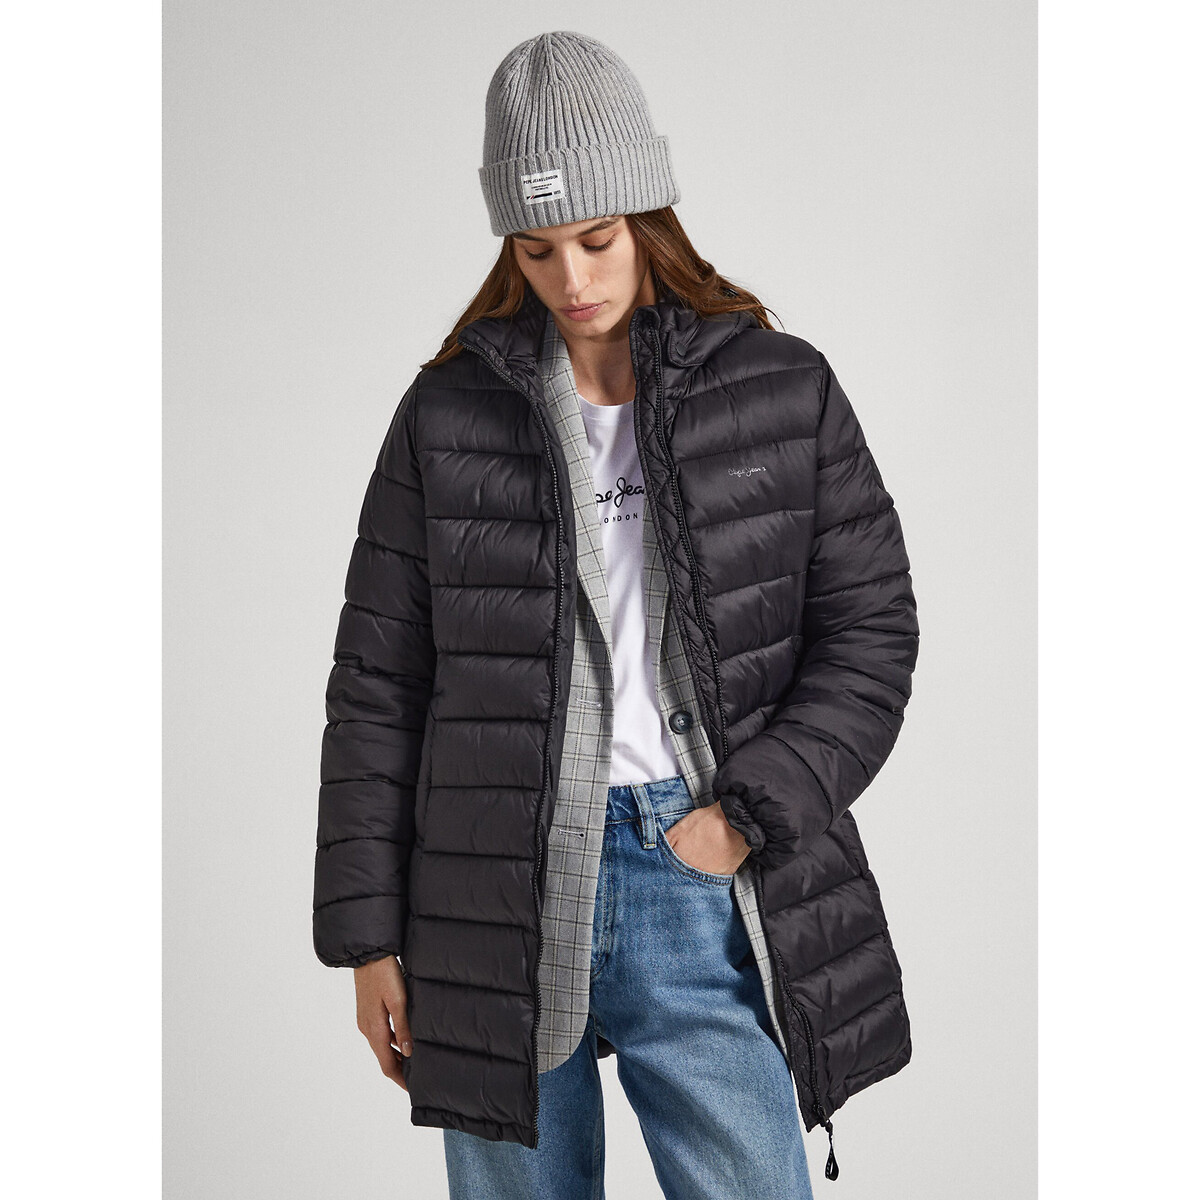 Recycled hooded padded jacket, black, Pepe Jeans | La Redoute